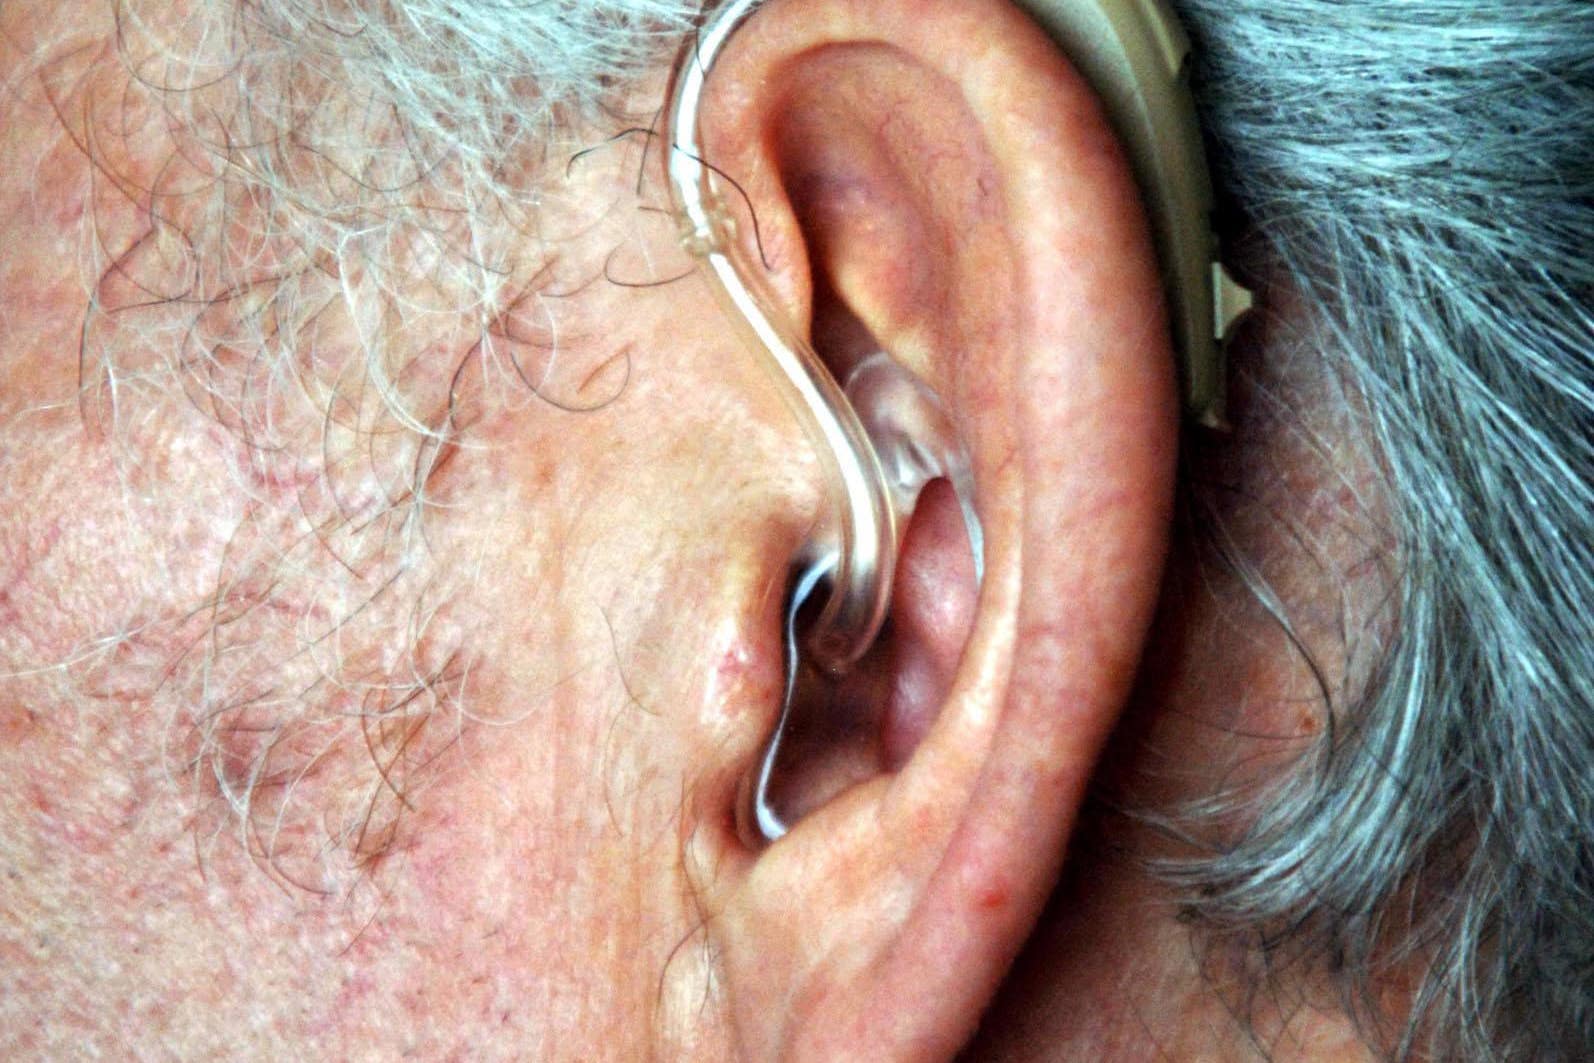 Many people with hearing loss fear it’s too late to mitigate it